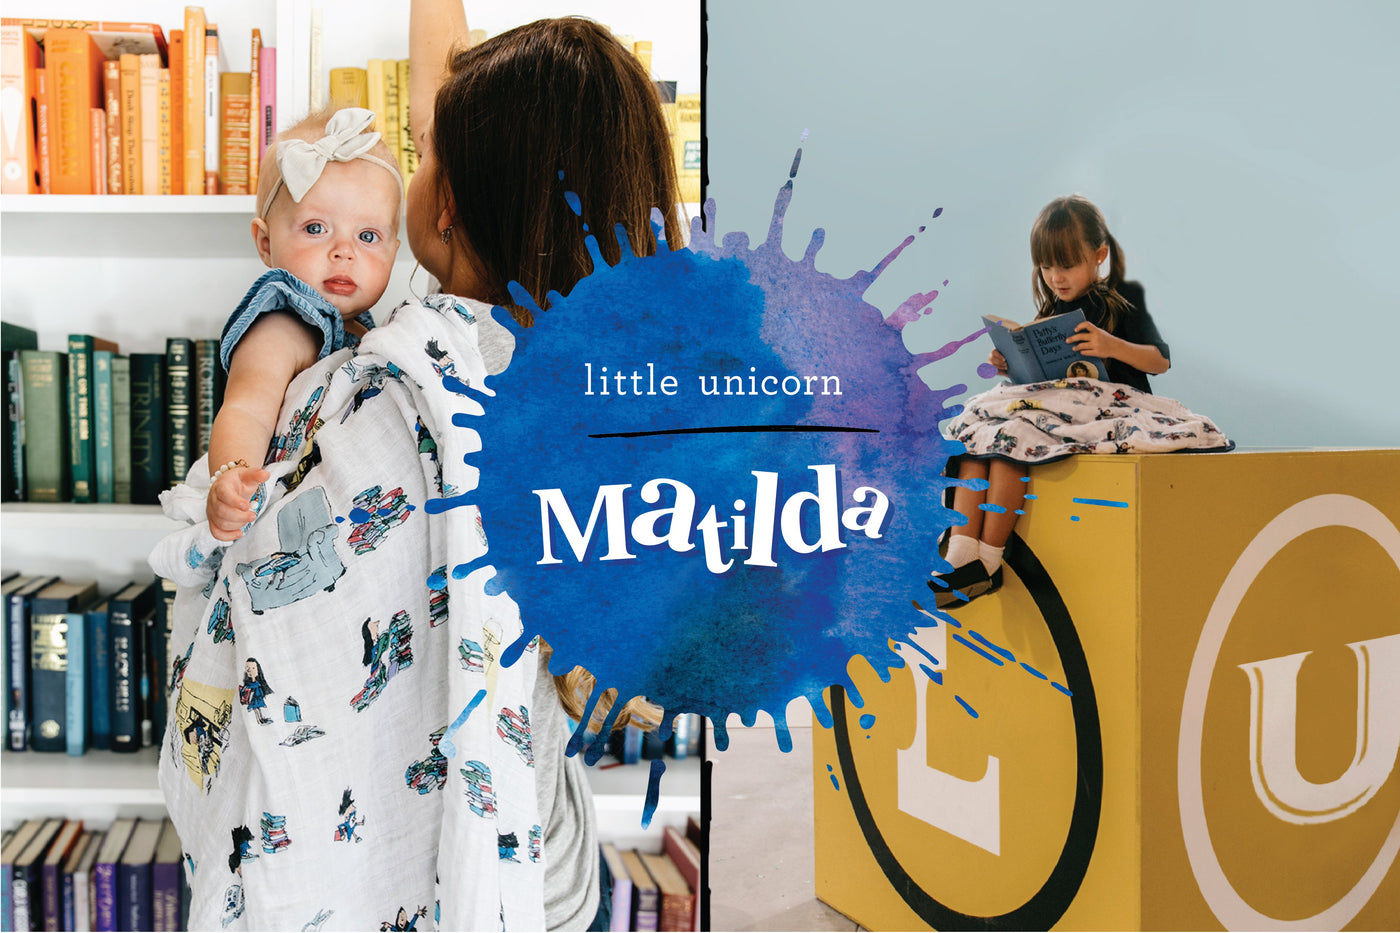 <style color="white" font-size="1px">Matilda</style>